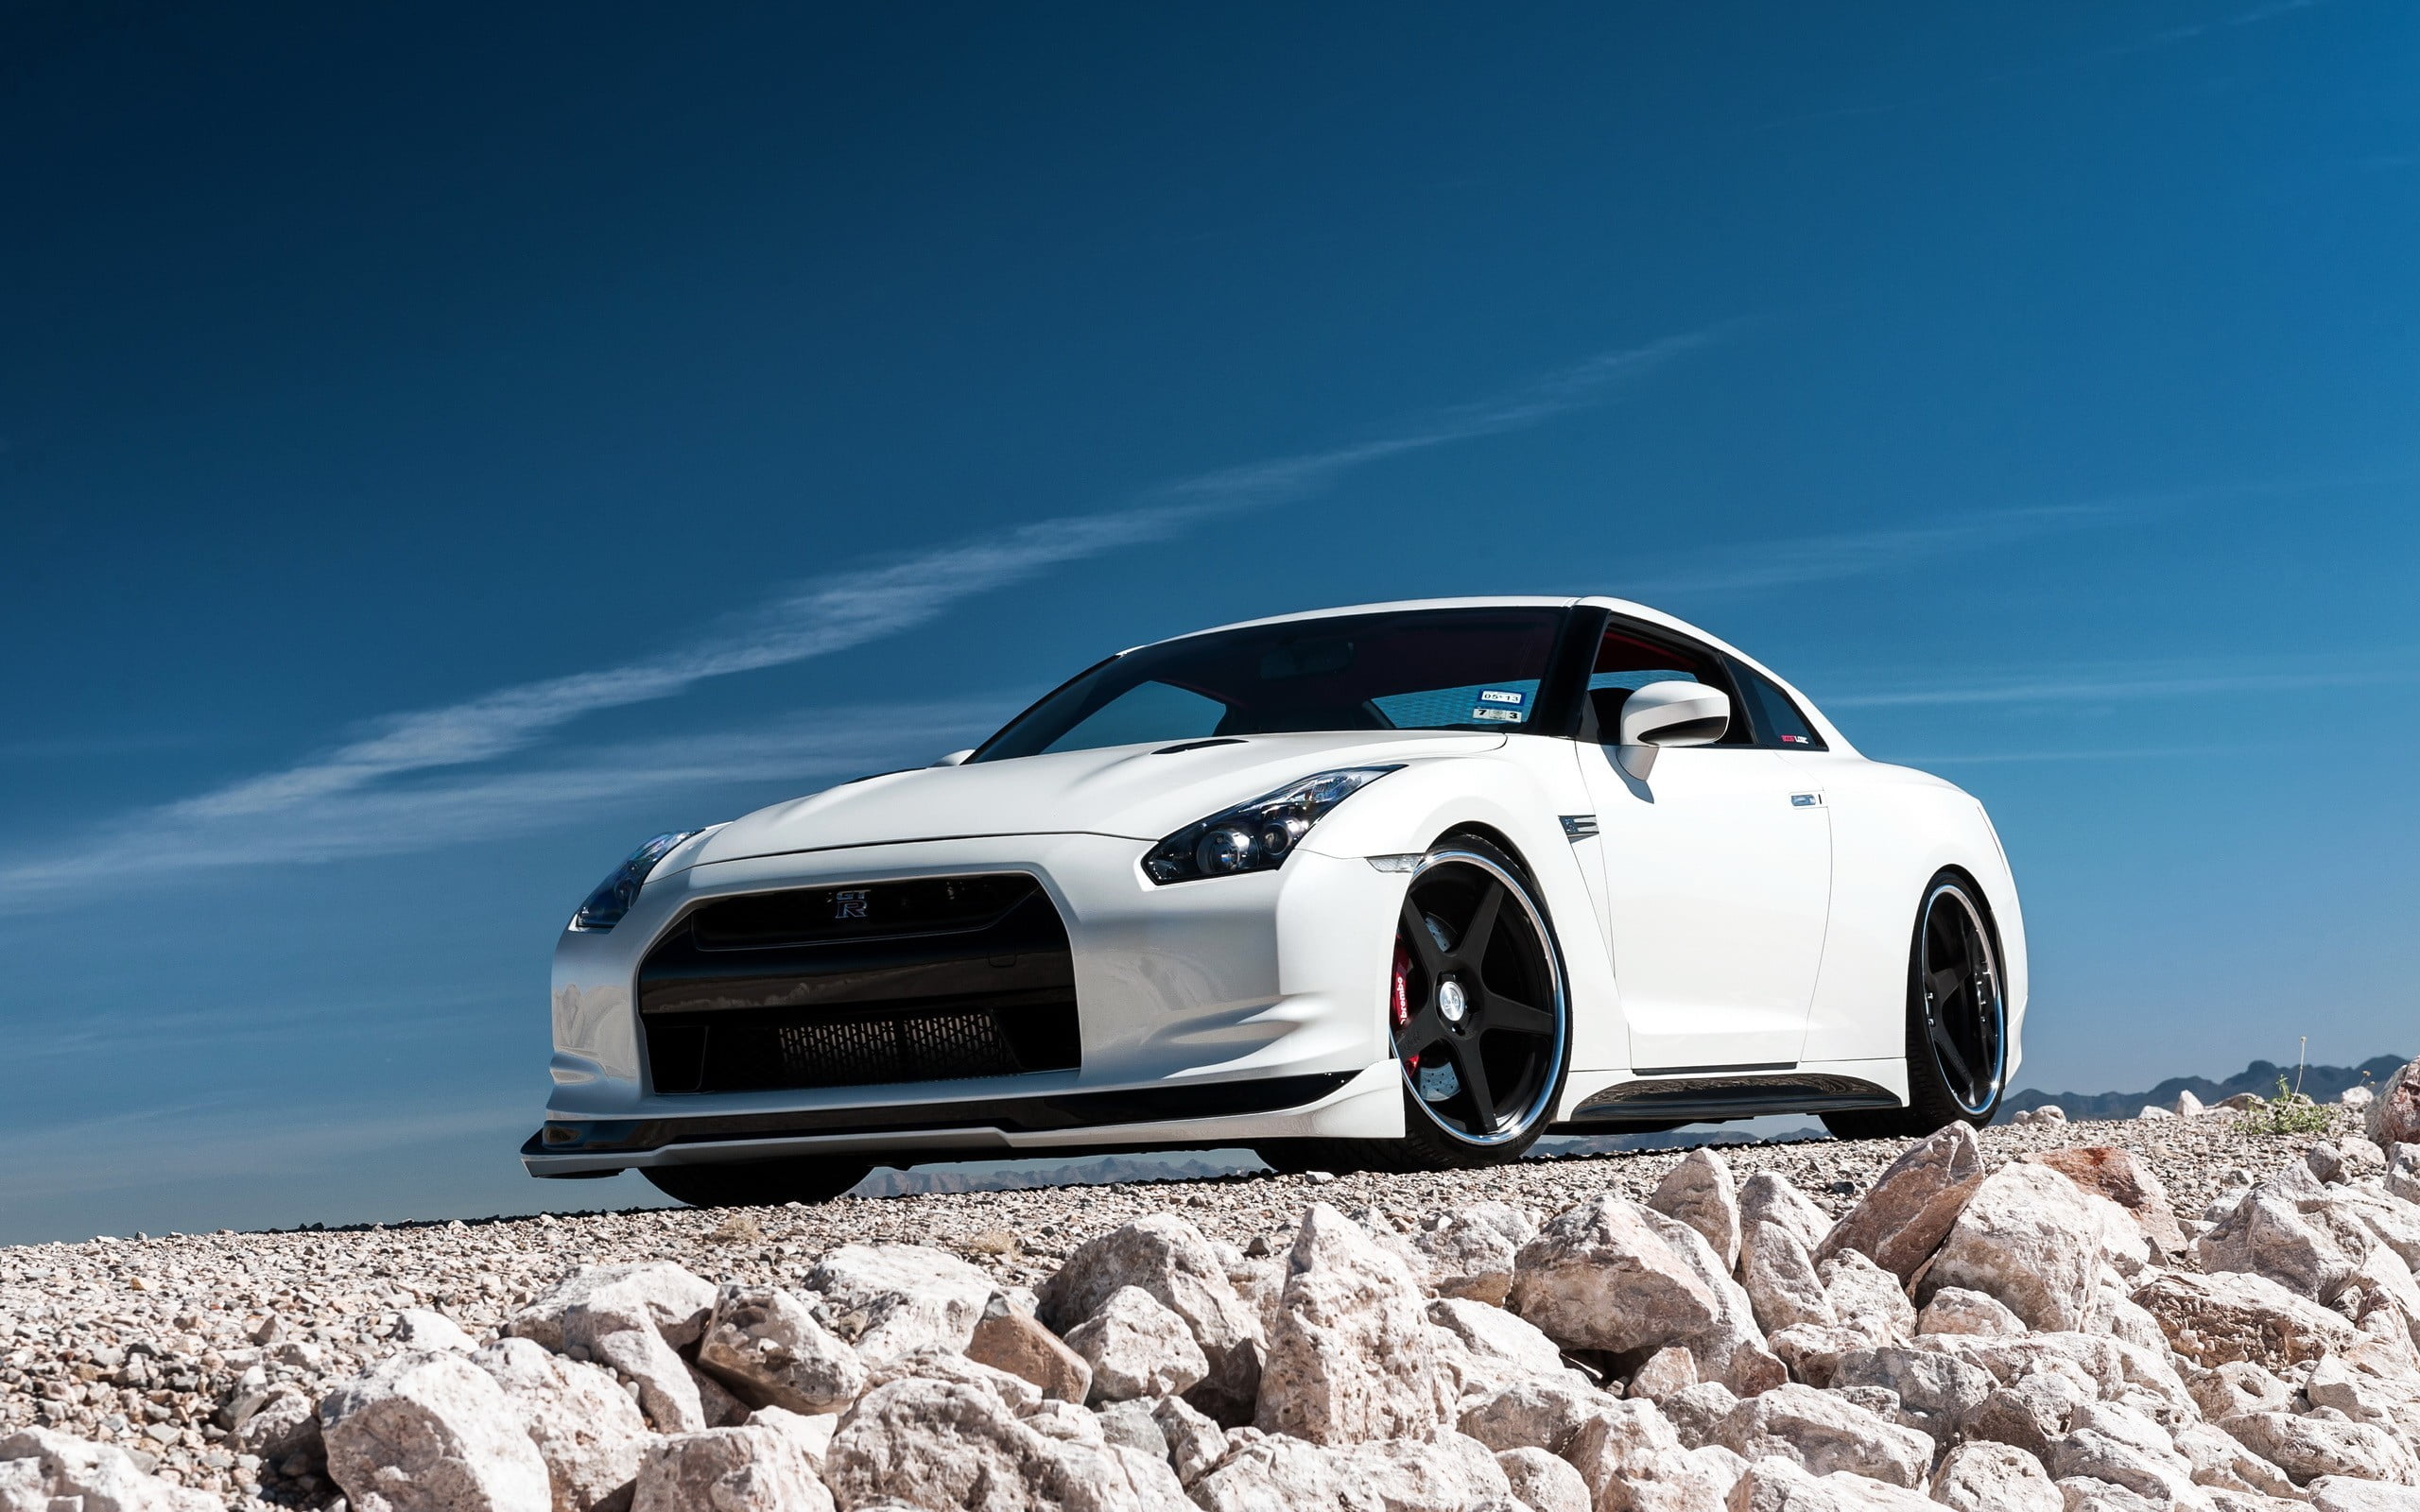 white and black convertible coupe, Nissan GT-R, car, mode of transportation